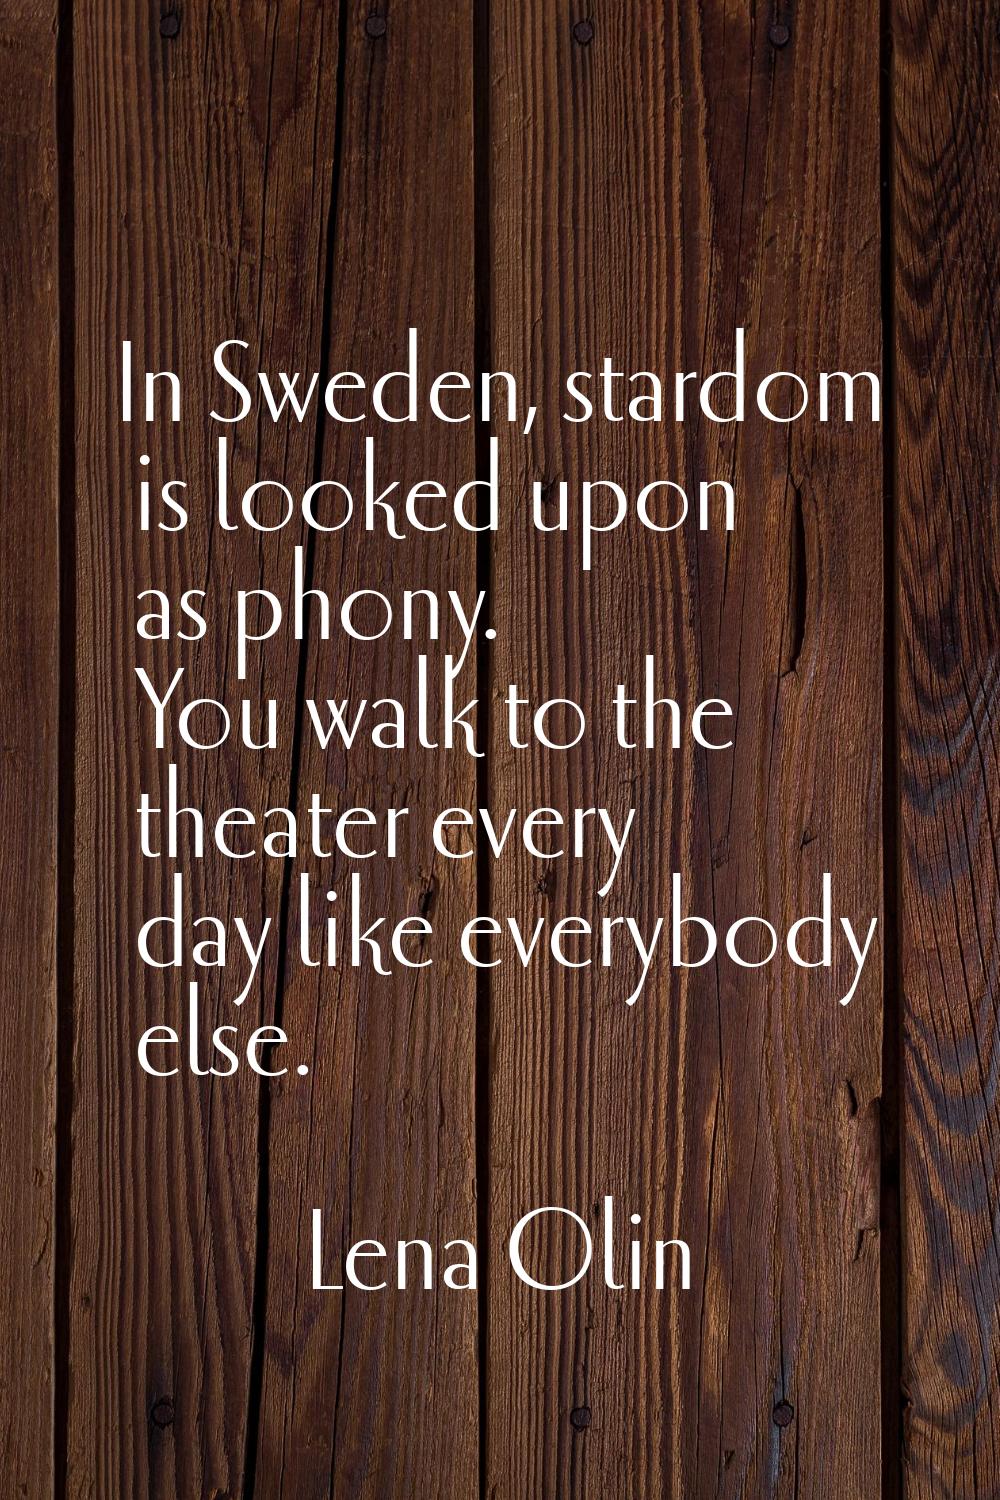 In Sweden, stardom is looked upon as phony. You walk to the theater every day like everybody else.